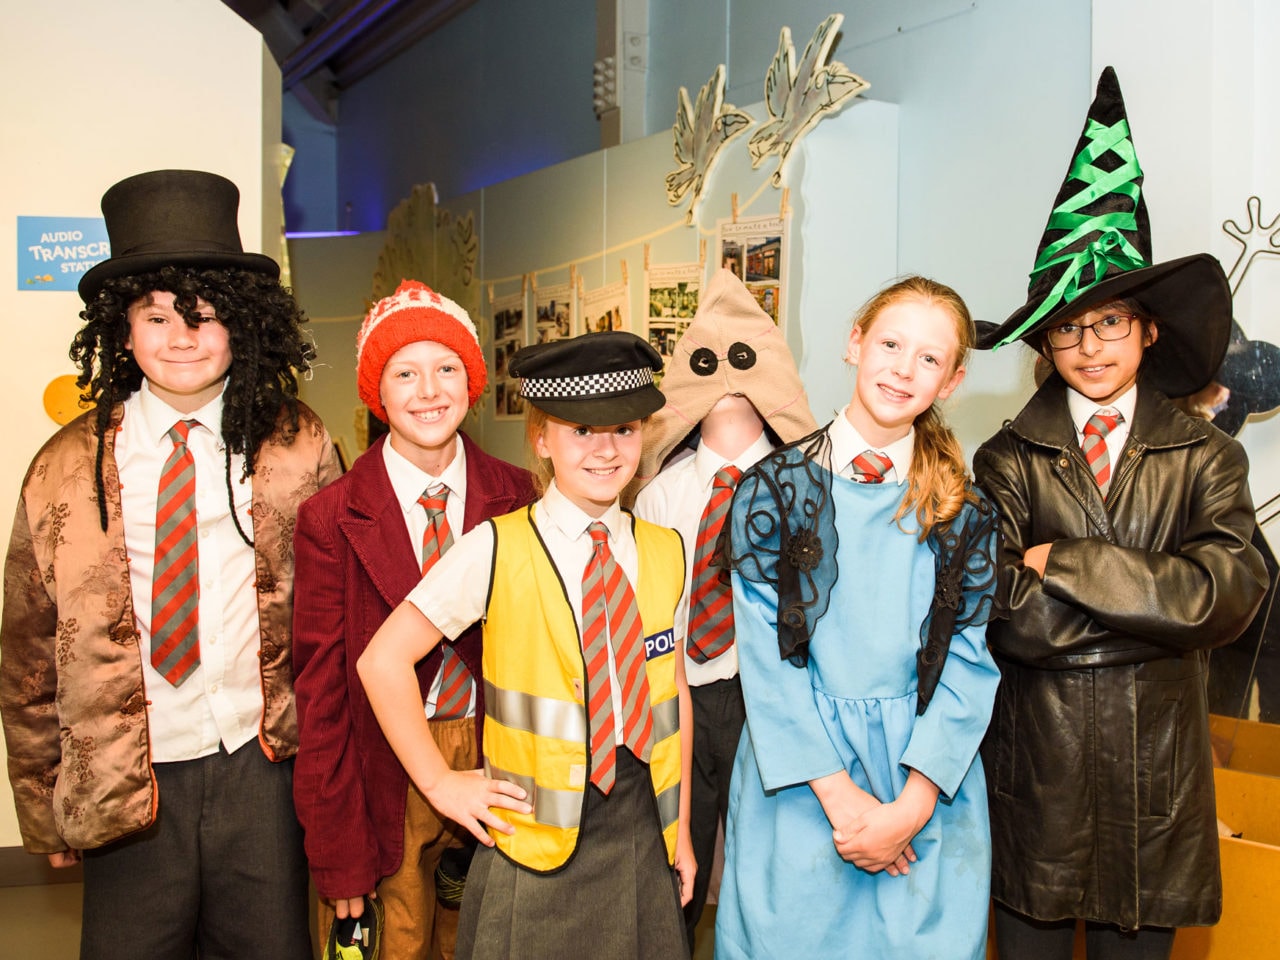 Six children stand facing the camera. They have all been trying on some fancy dress costumes and have various garments over their school uniform. One has a witches hat, one has a blue dress, one looks like a police woman, other are wearing interesting hats.